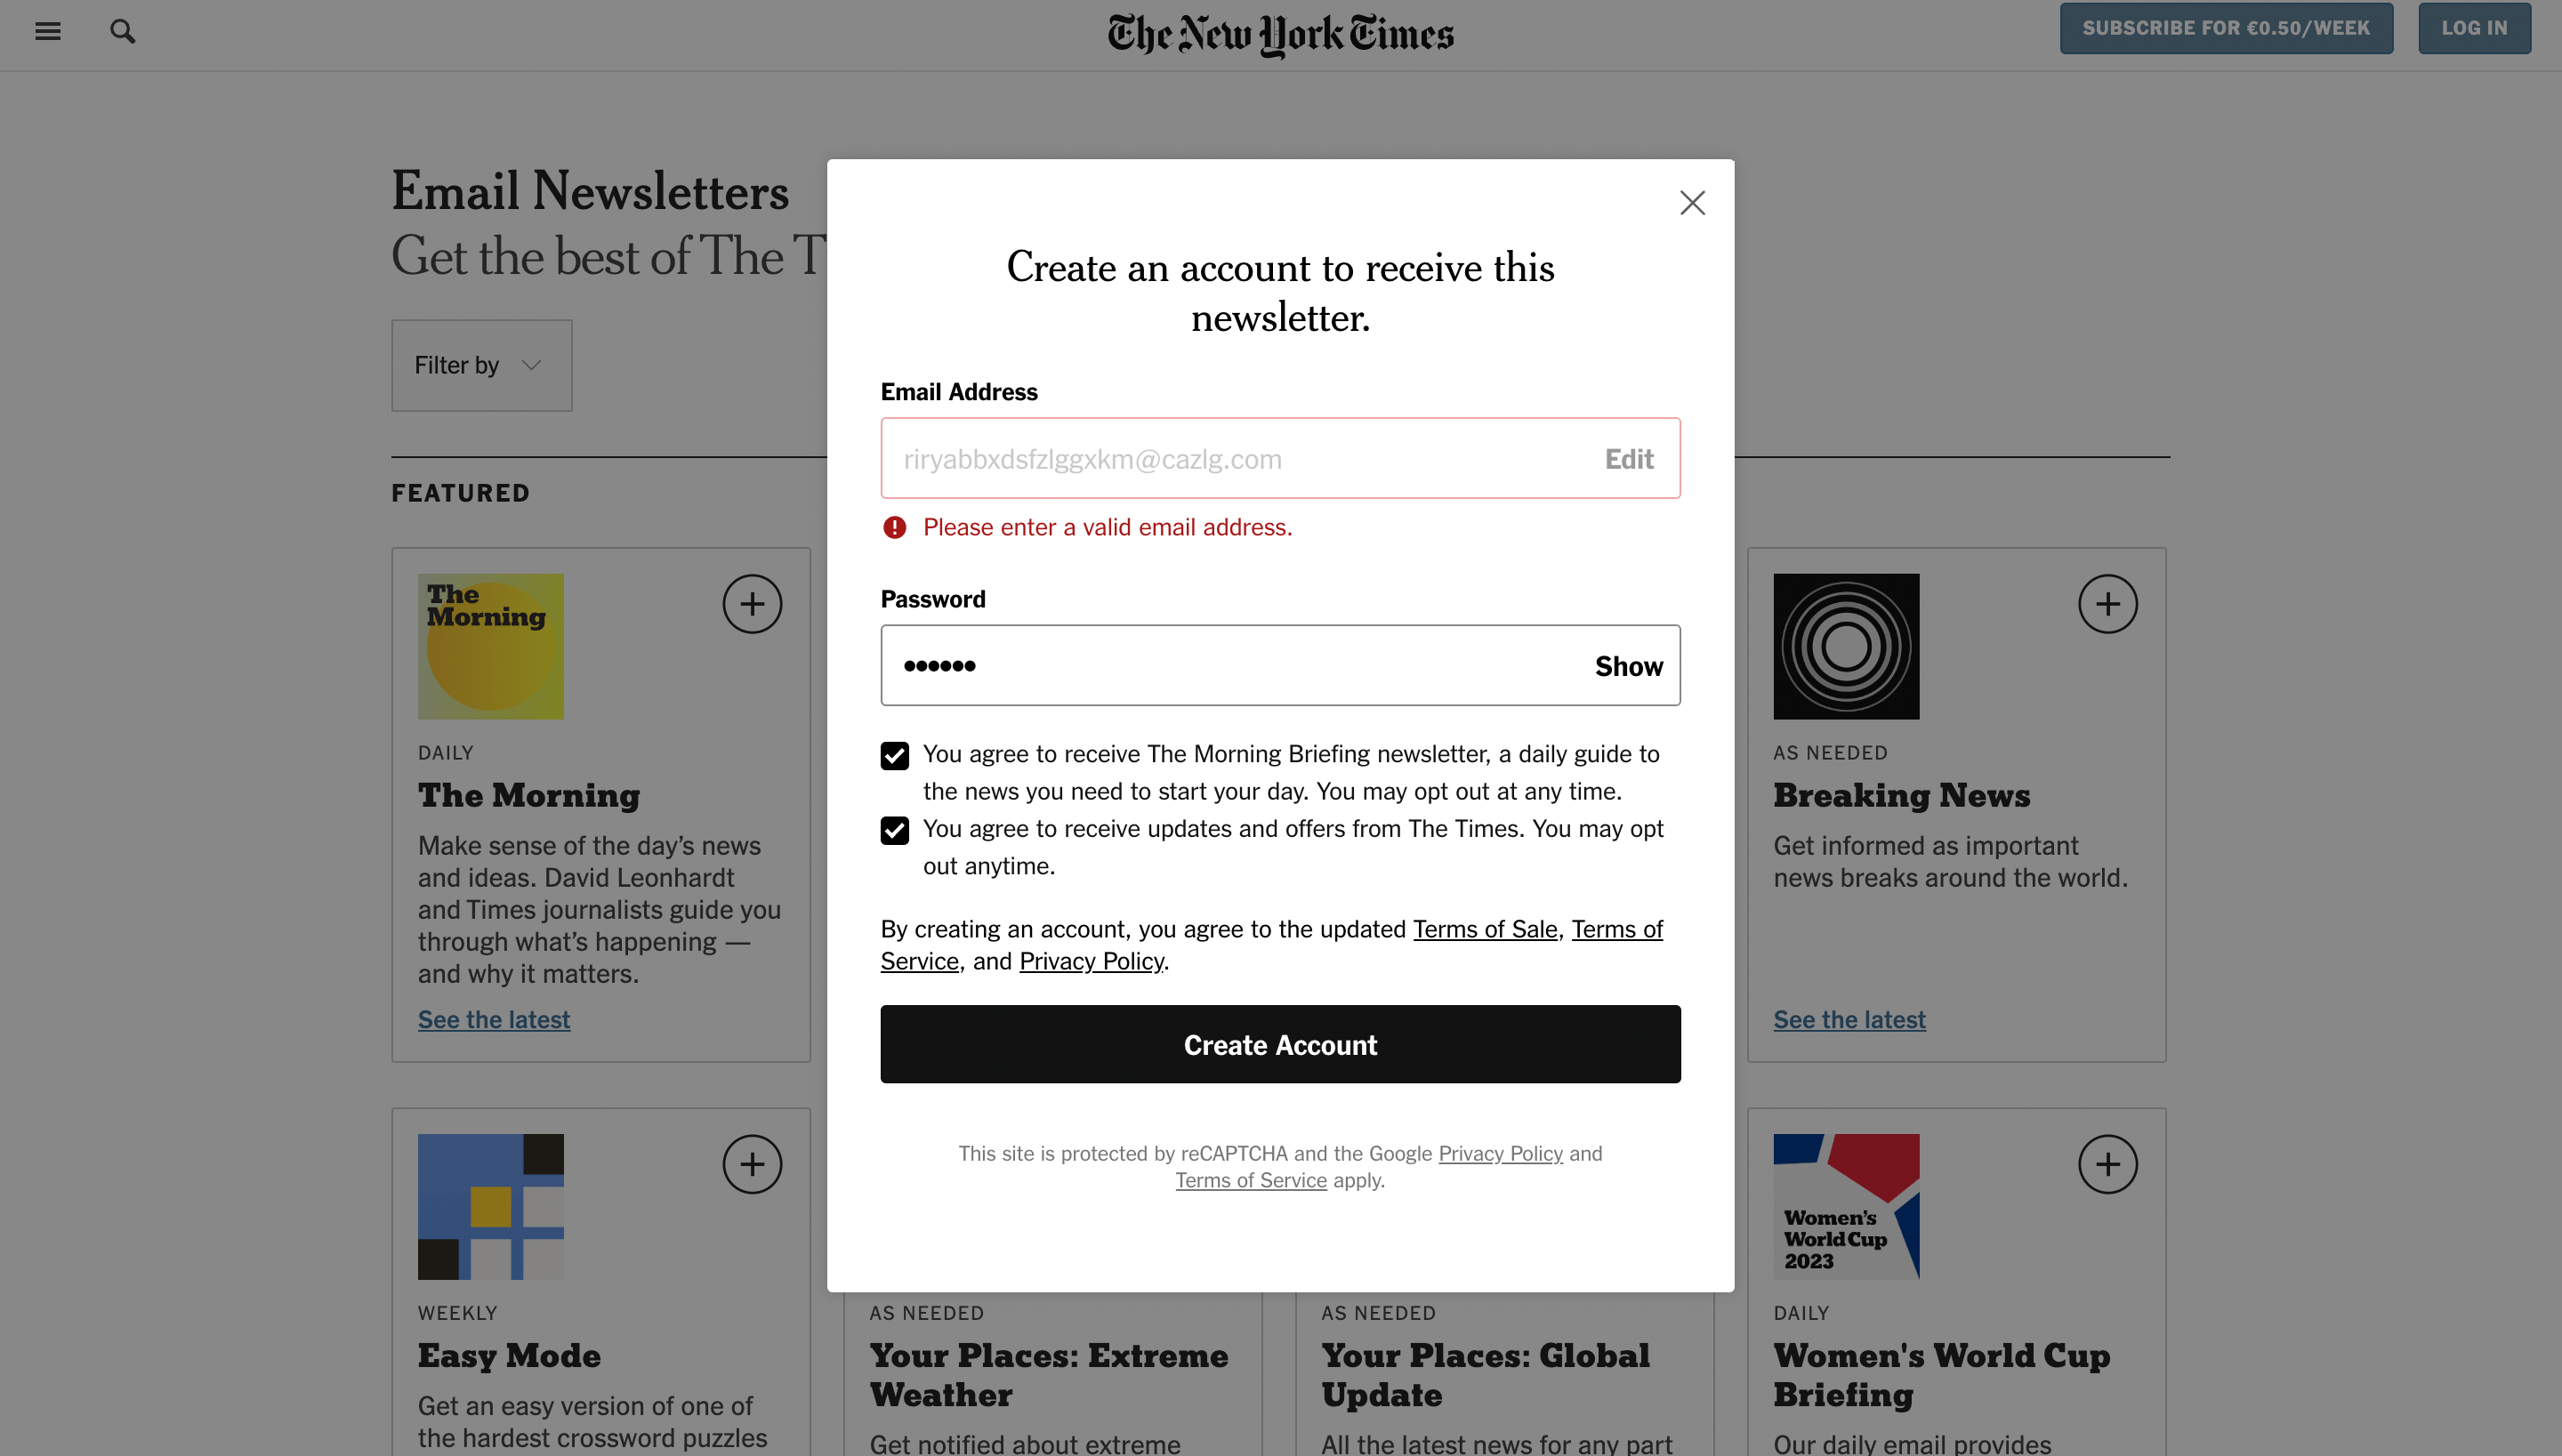 Unsuccessful attempt to subscribe to the Morning Briefing newsletter by New York Times with a temporary email address. The error message reads: “Please enter a valid email address”